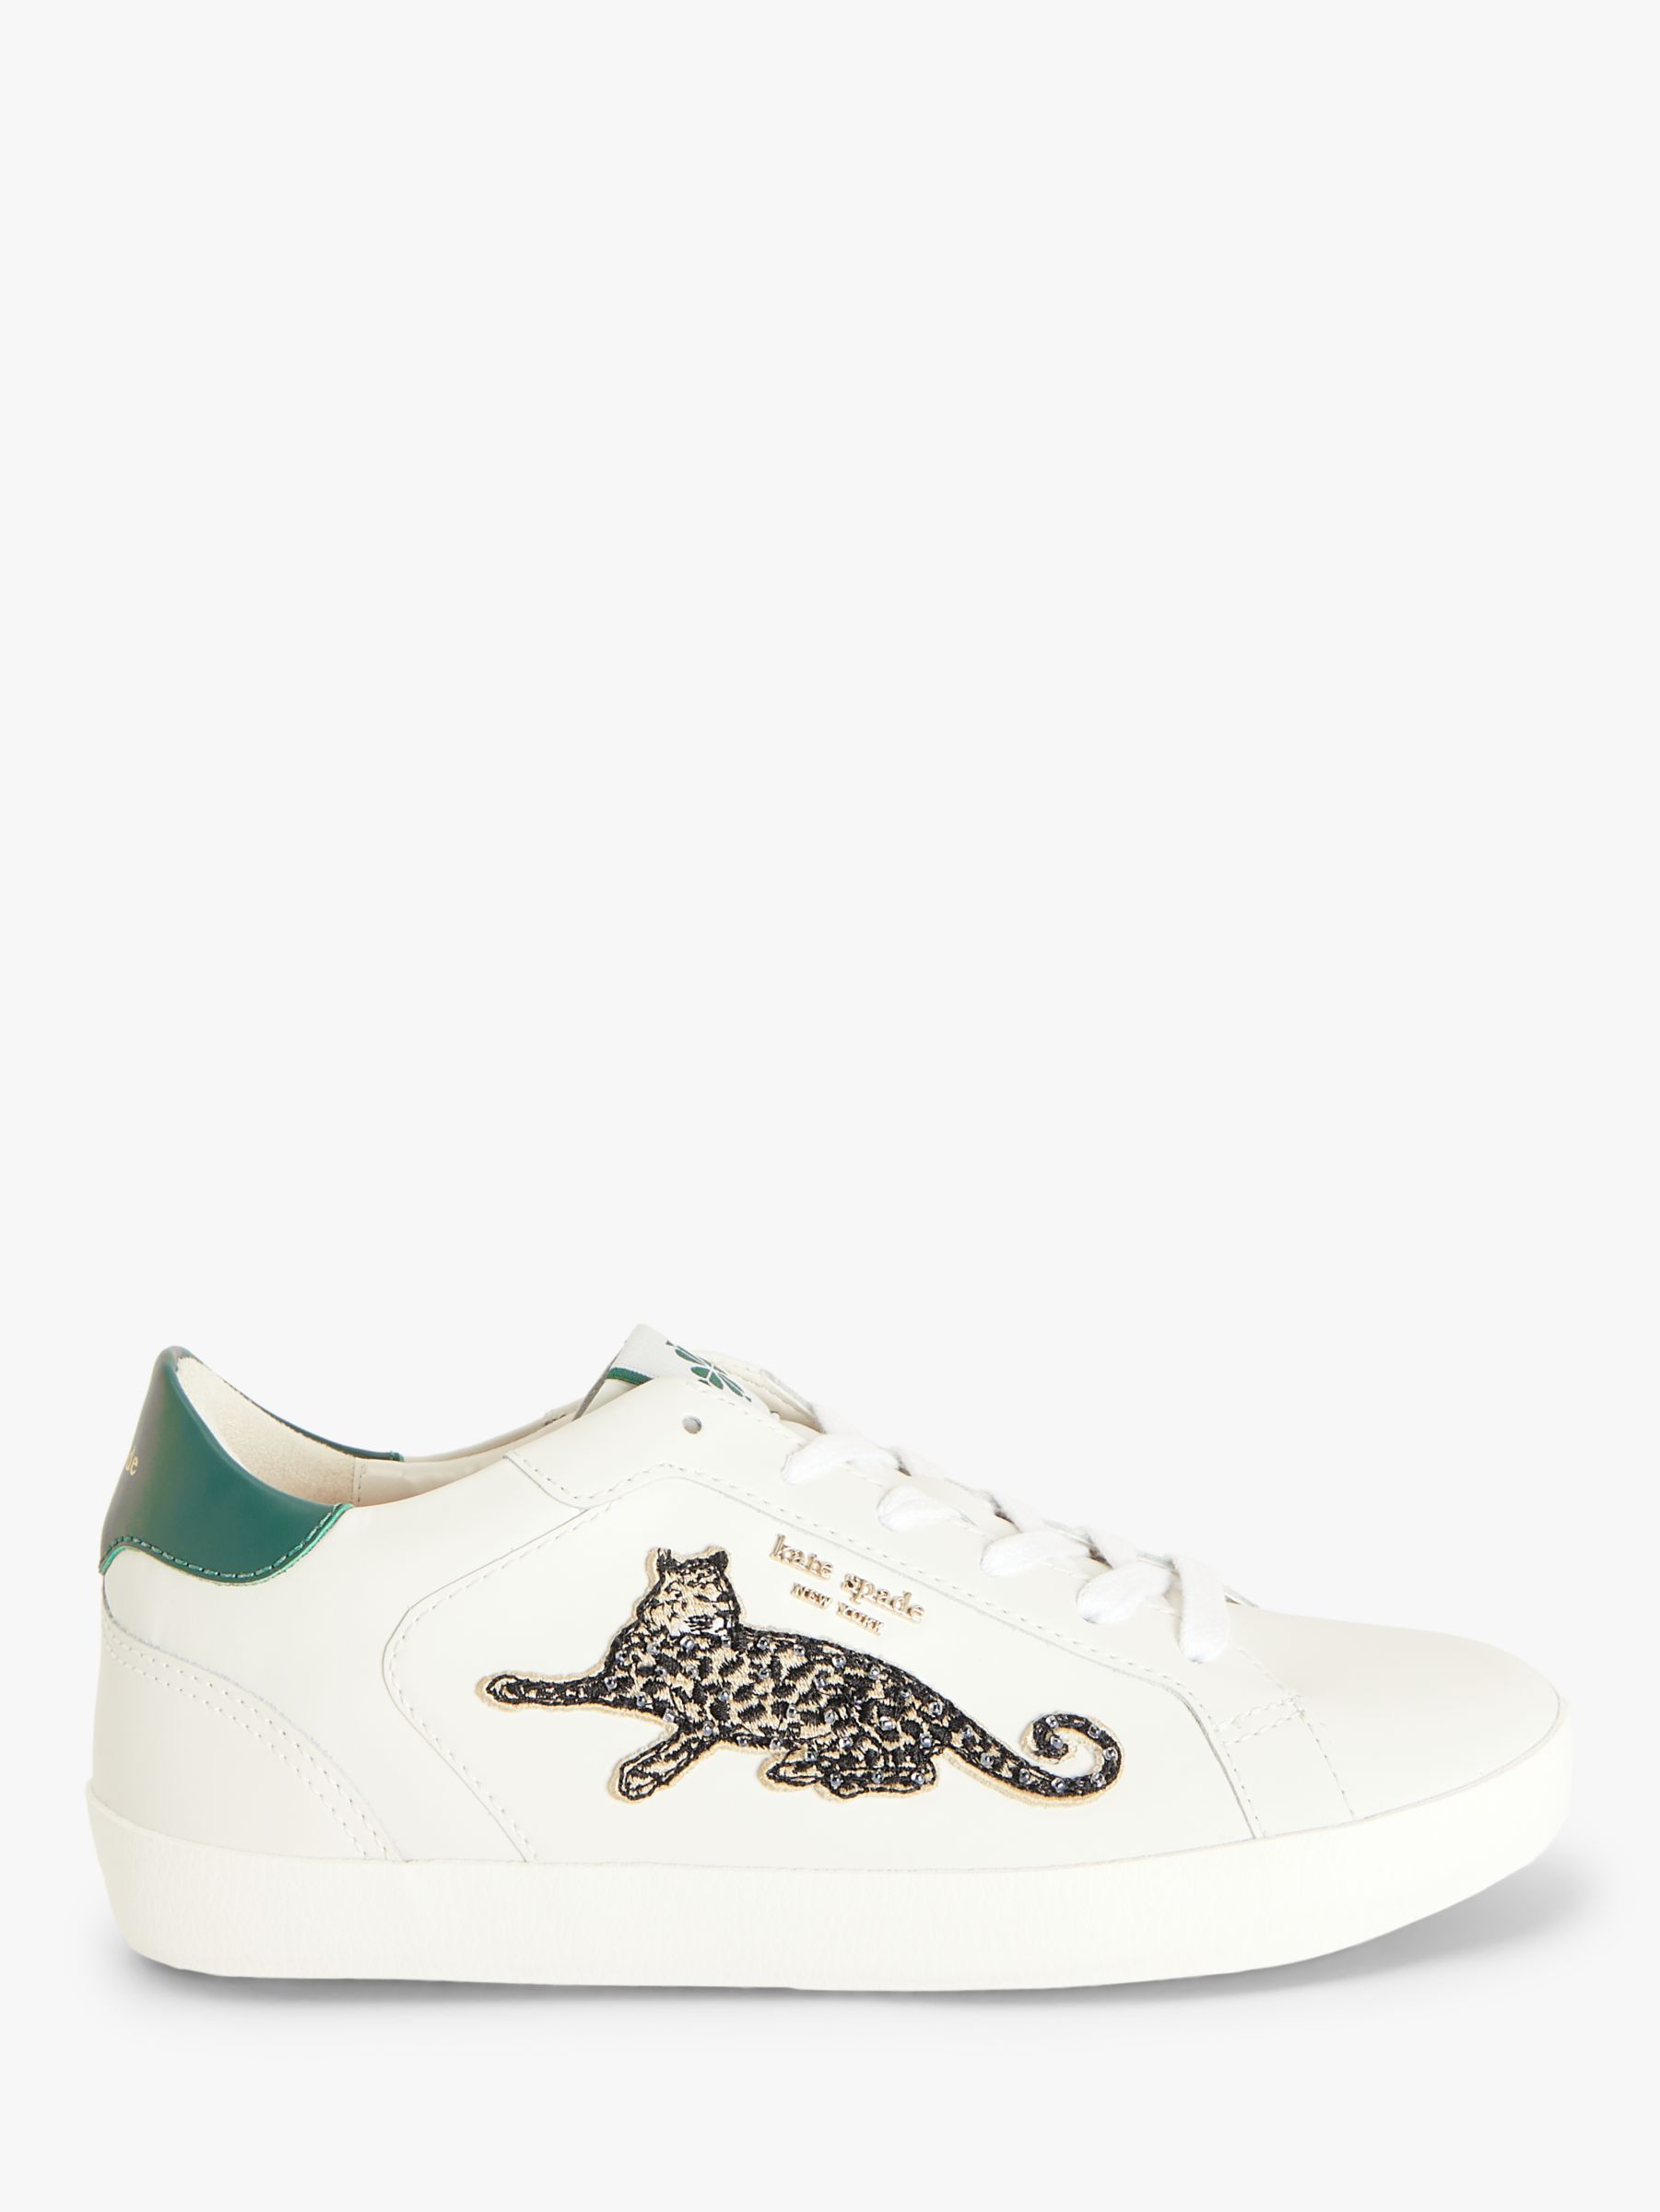 kate spade new york Ace Leopard Low Top Leather Trainers, Arugula/Multi